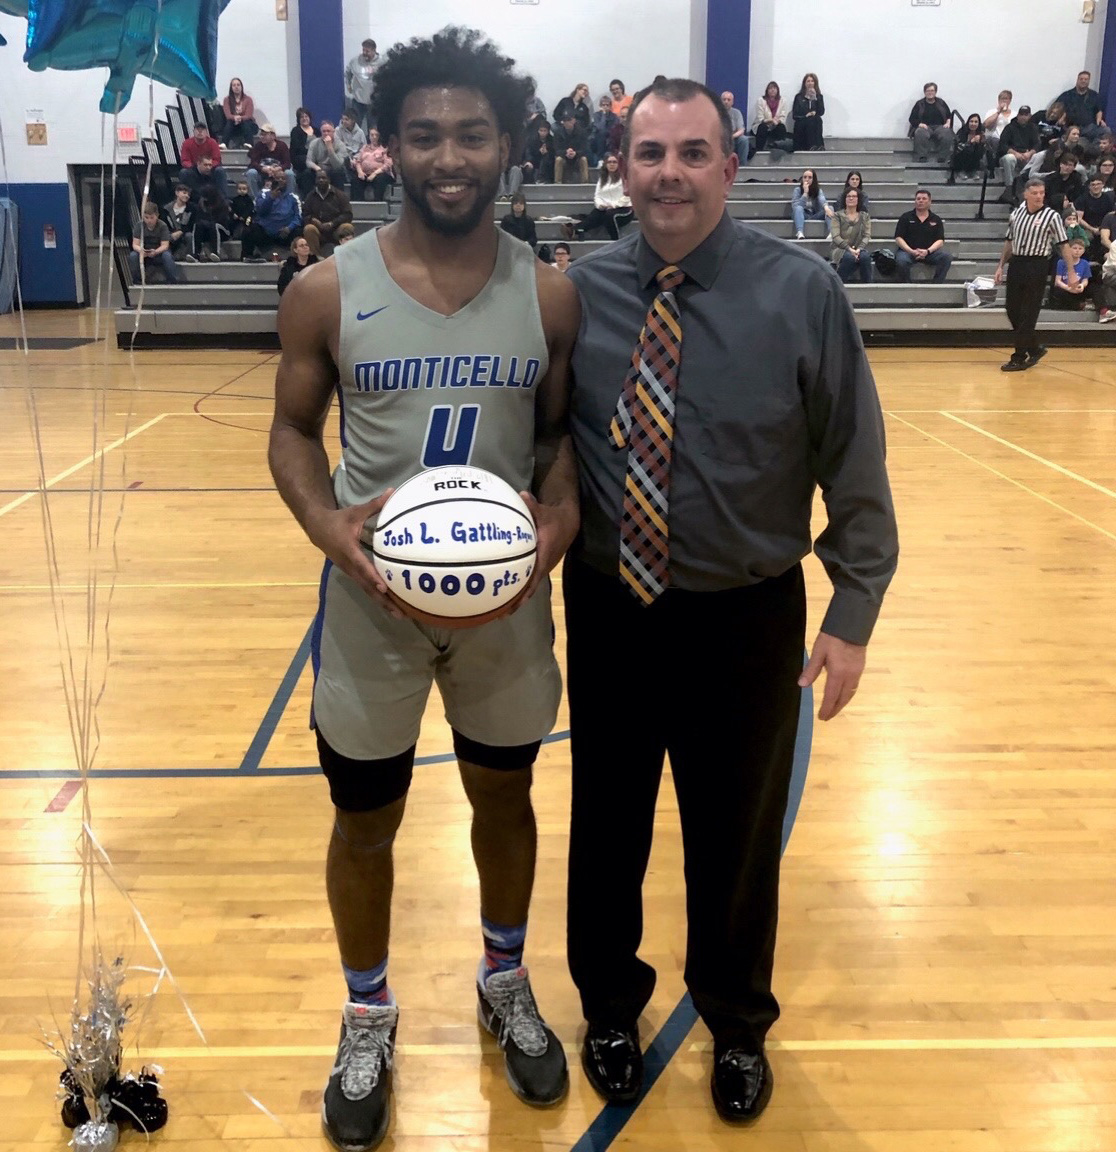 A high school basketball player in a gray and blue uniform holds a basketball painted white with words marking his 1000th point.